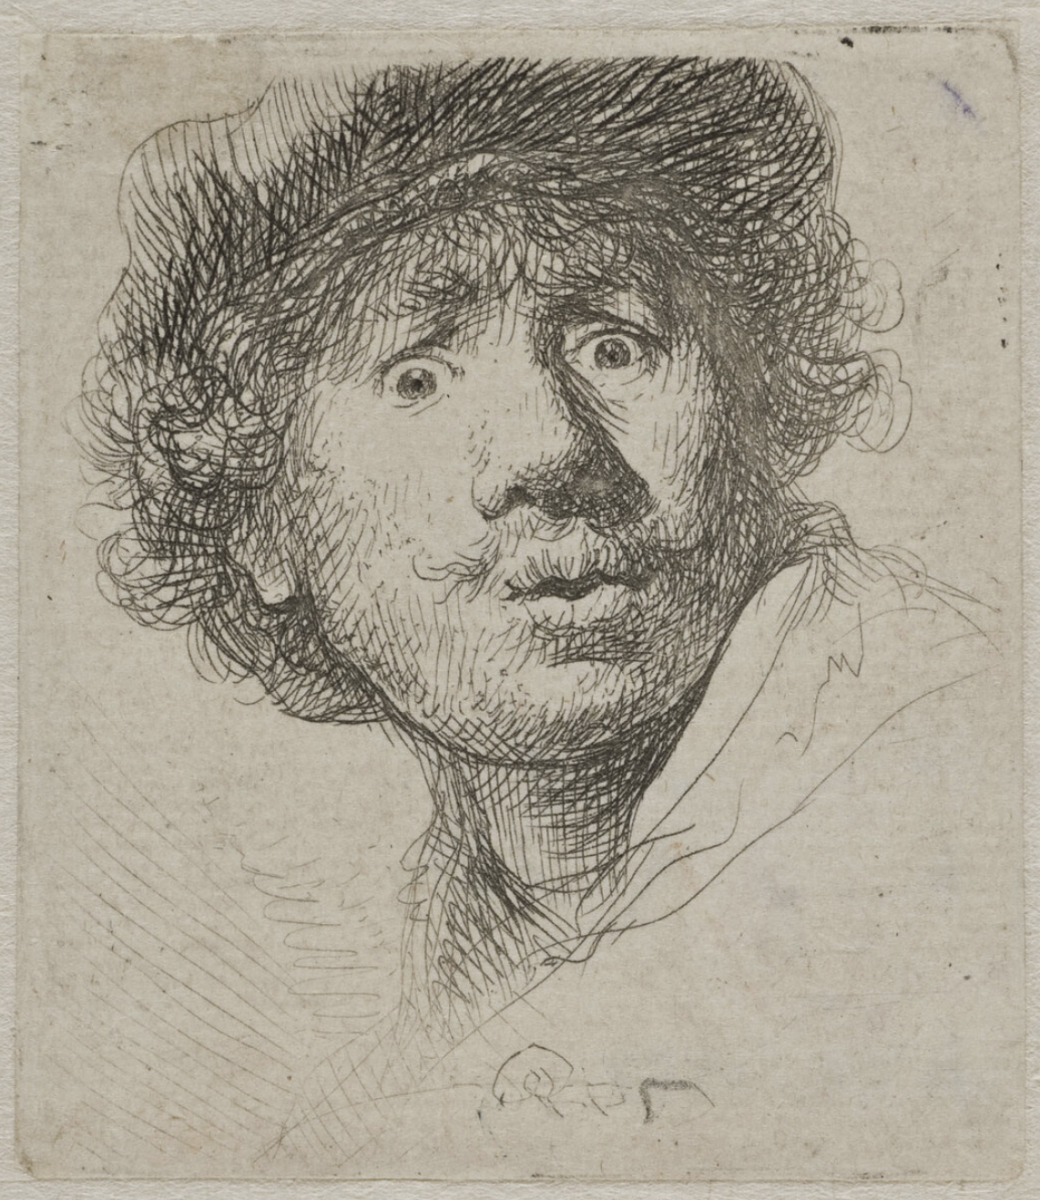 Rembrandt's Self Portraits: An Intimate Study Through Time